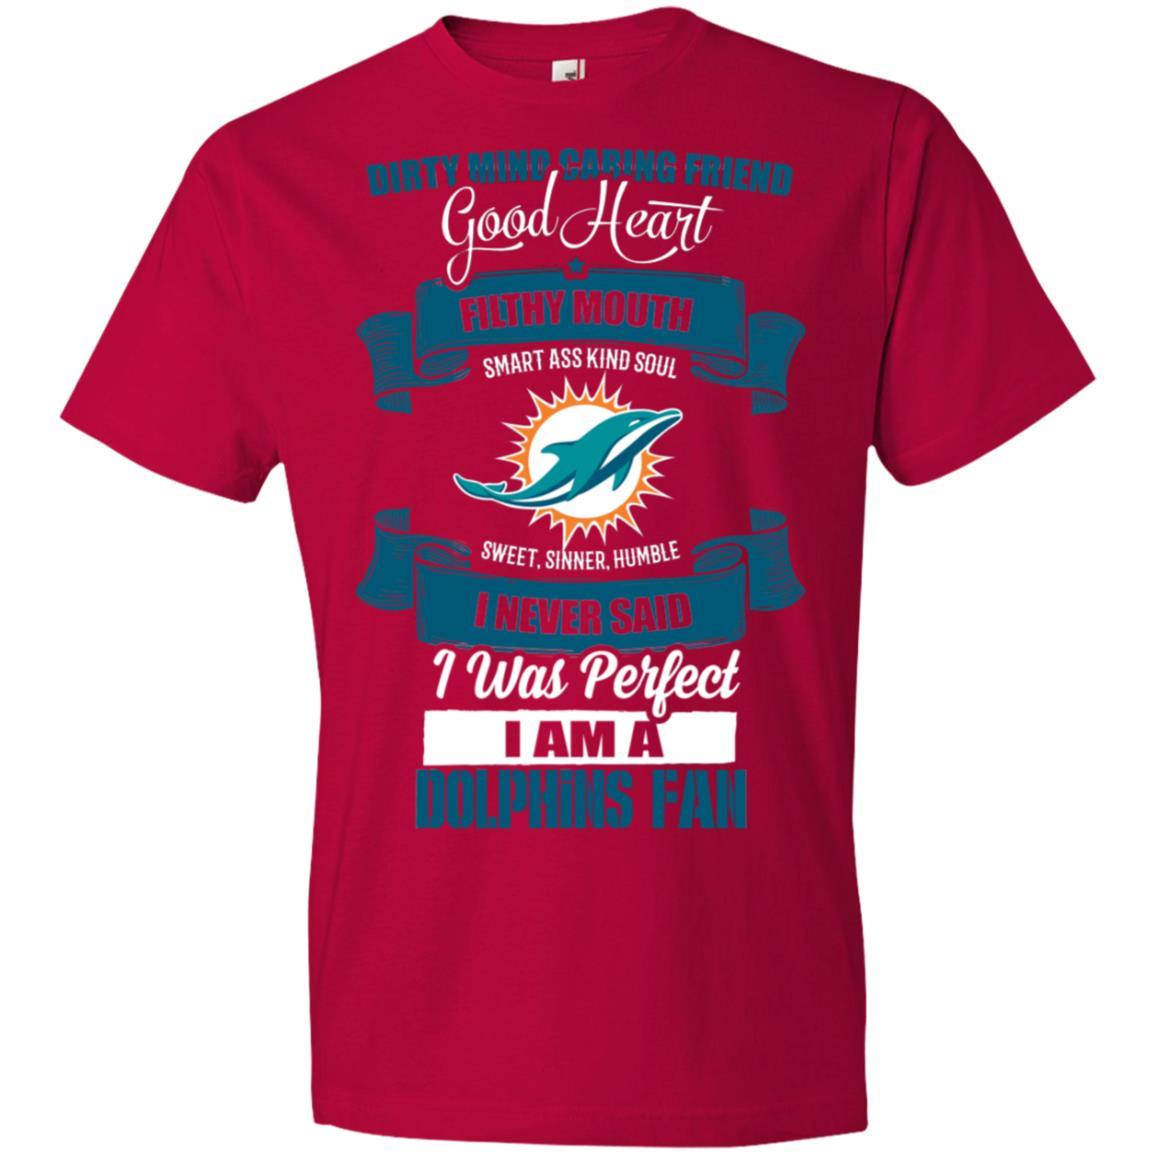 Miami Dolphins Shop - I Am A Miami Dolphins Fan Tshirt For Lovers 9